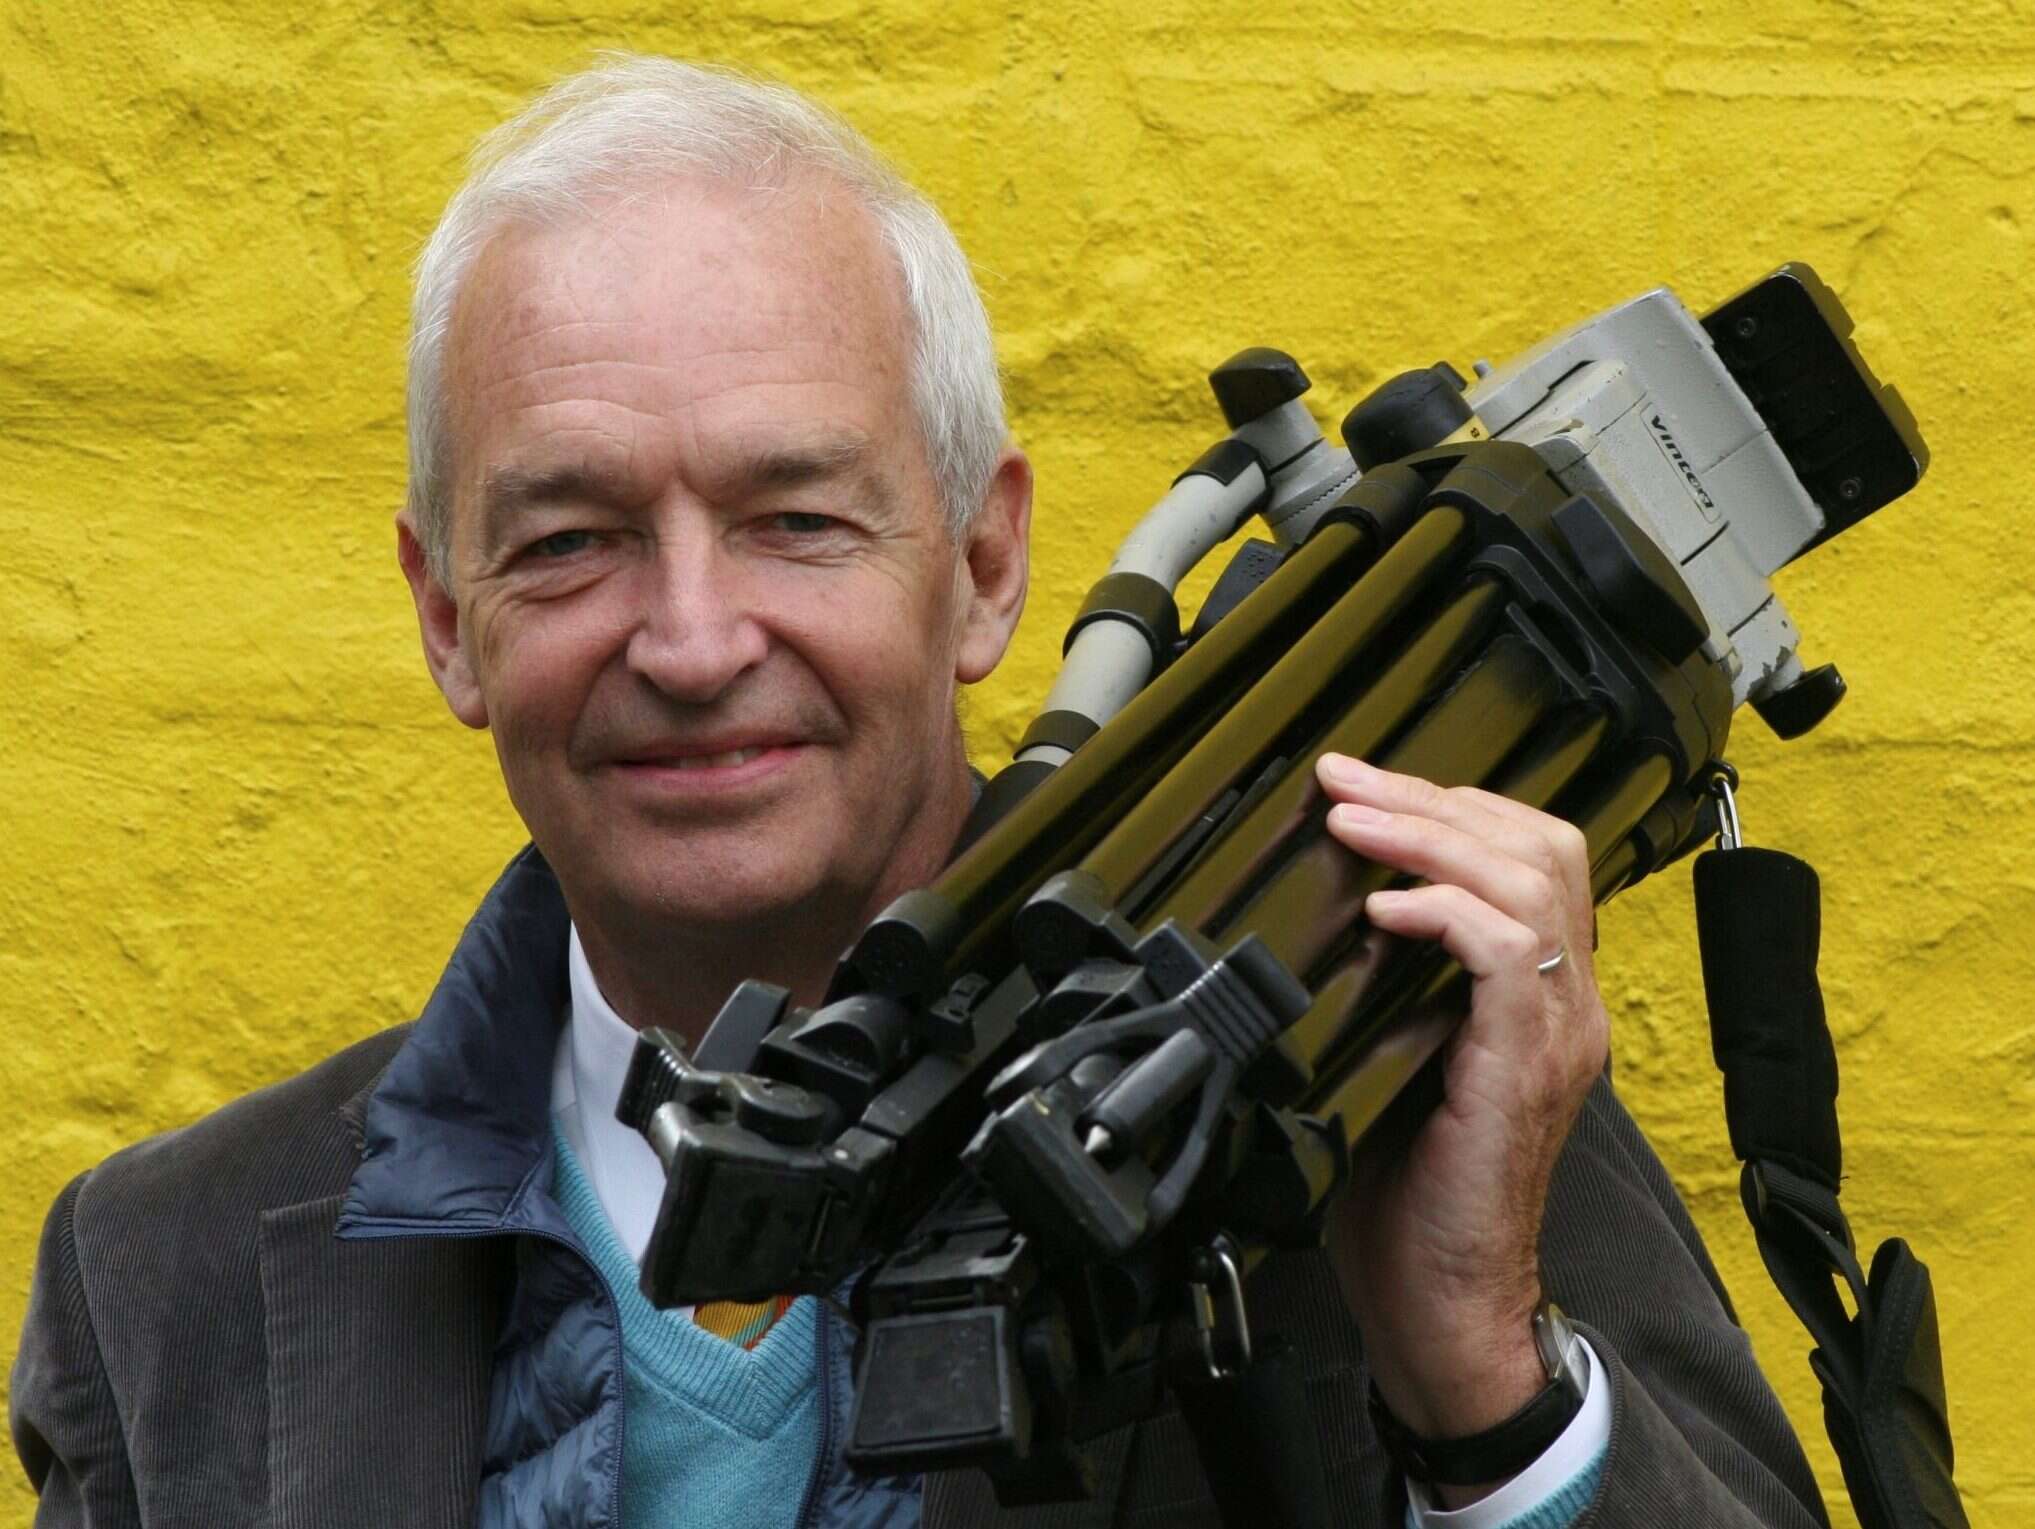 Jon Snow to step down as Channel 4 News presenter after 32 years